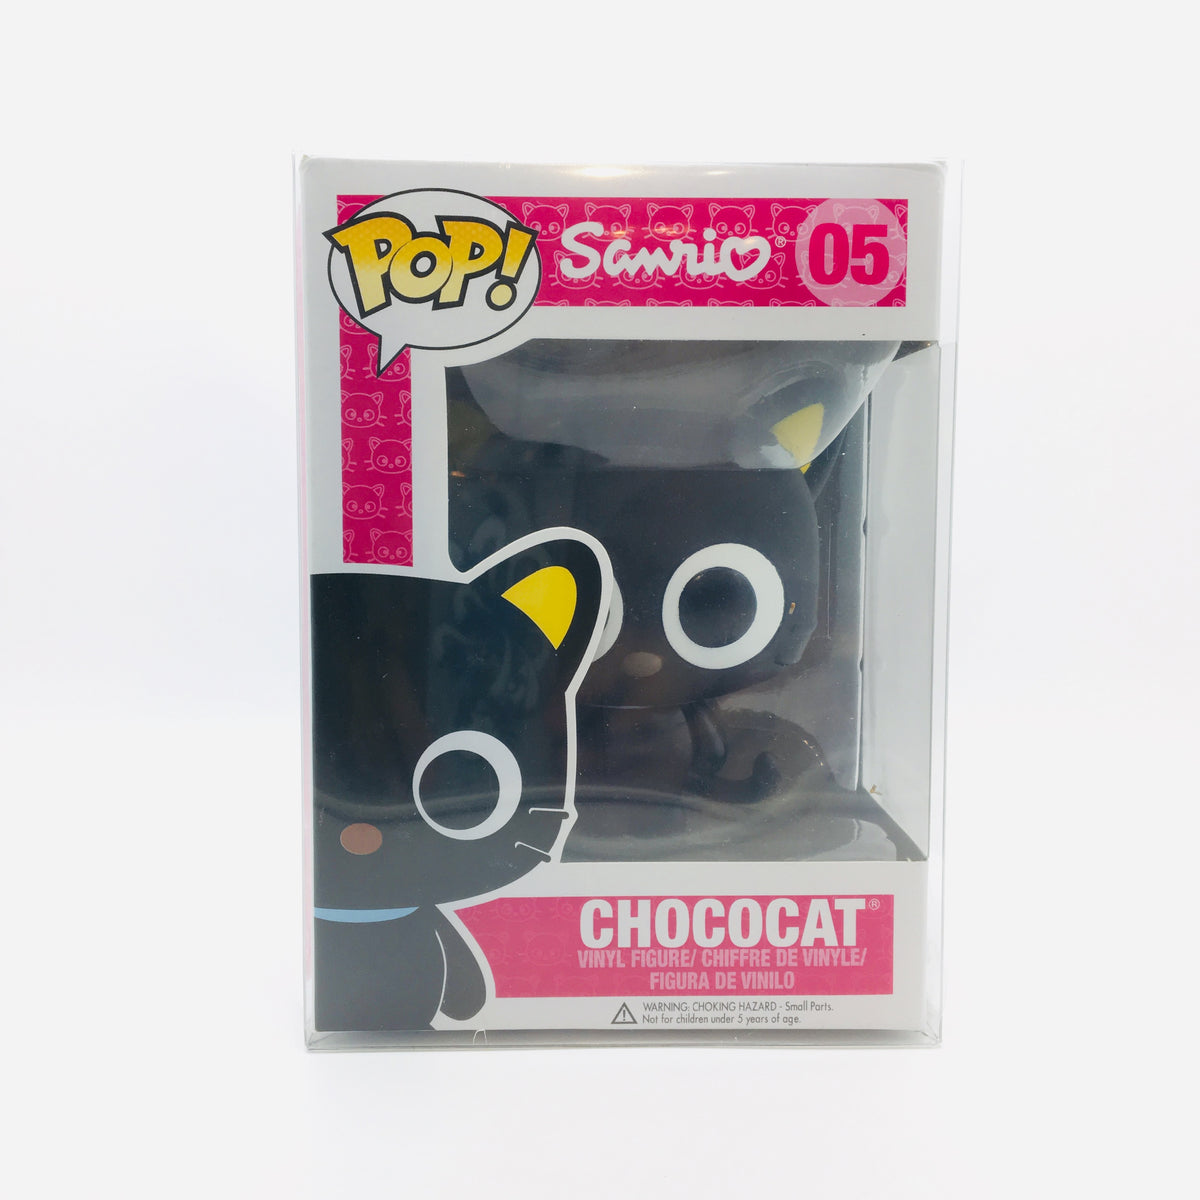 Sanrio Chocolate Pop Toy Figure #05 Vaulted by Funko